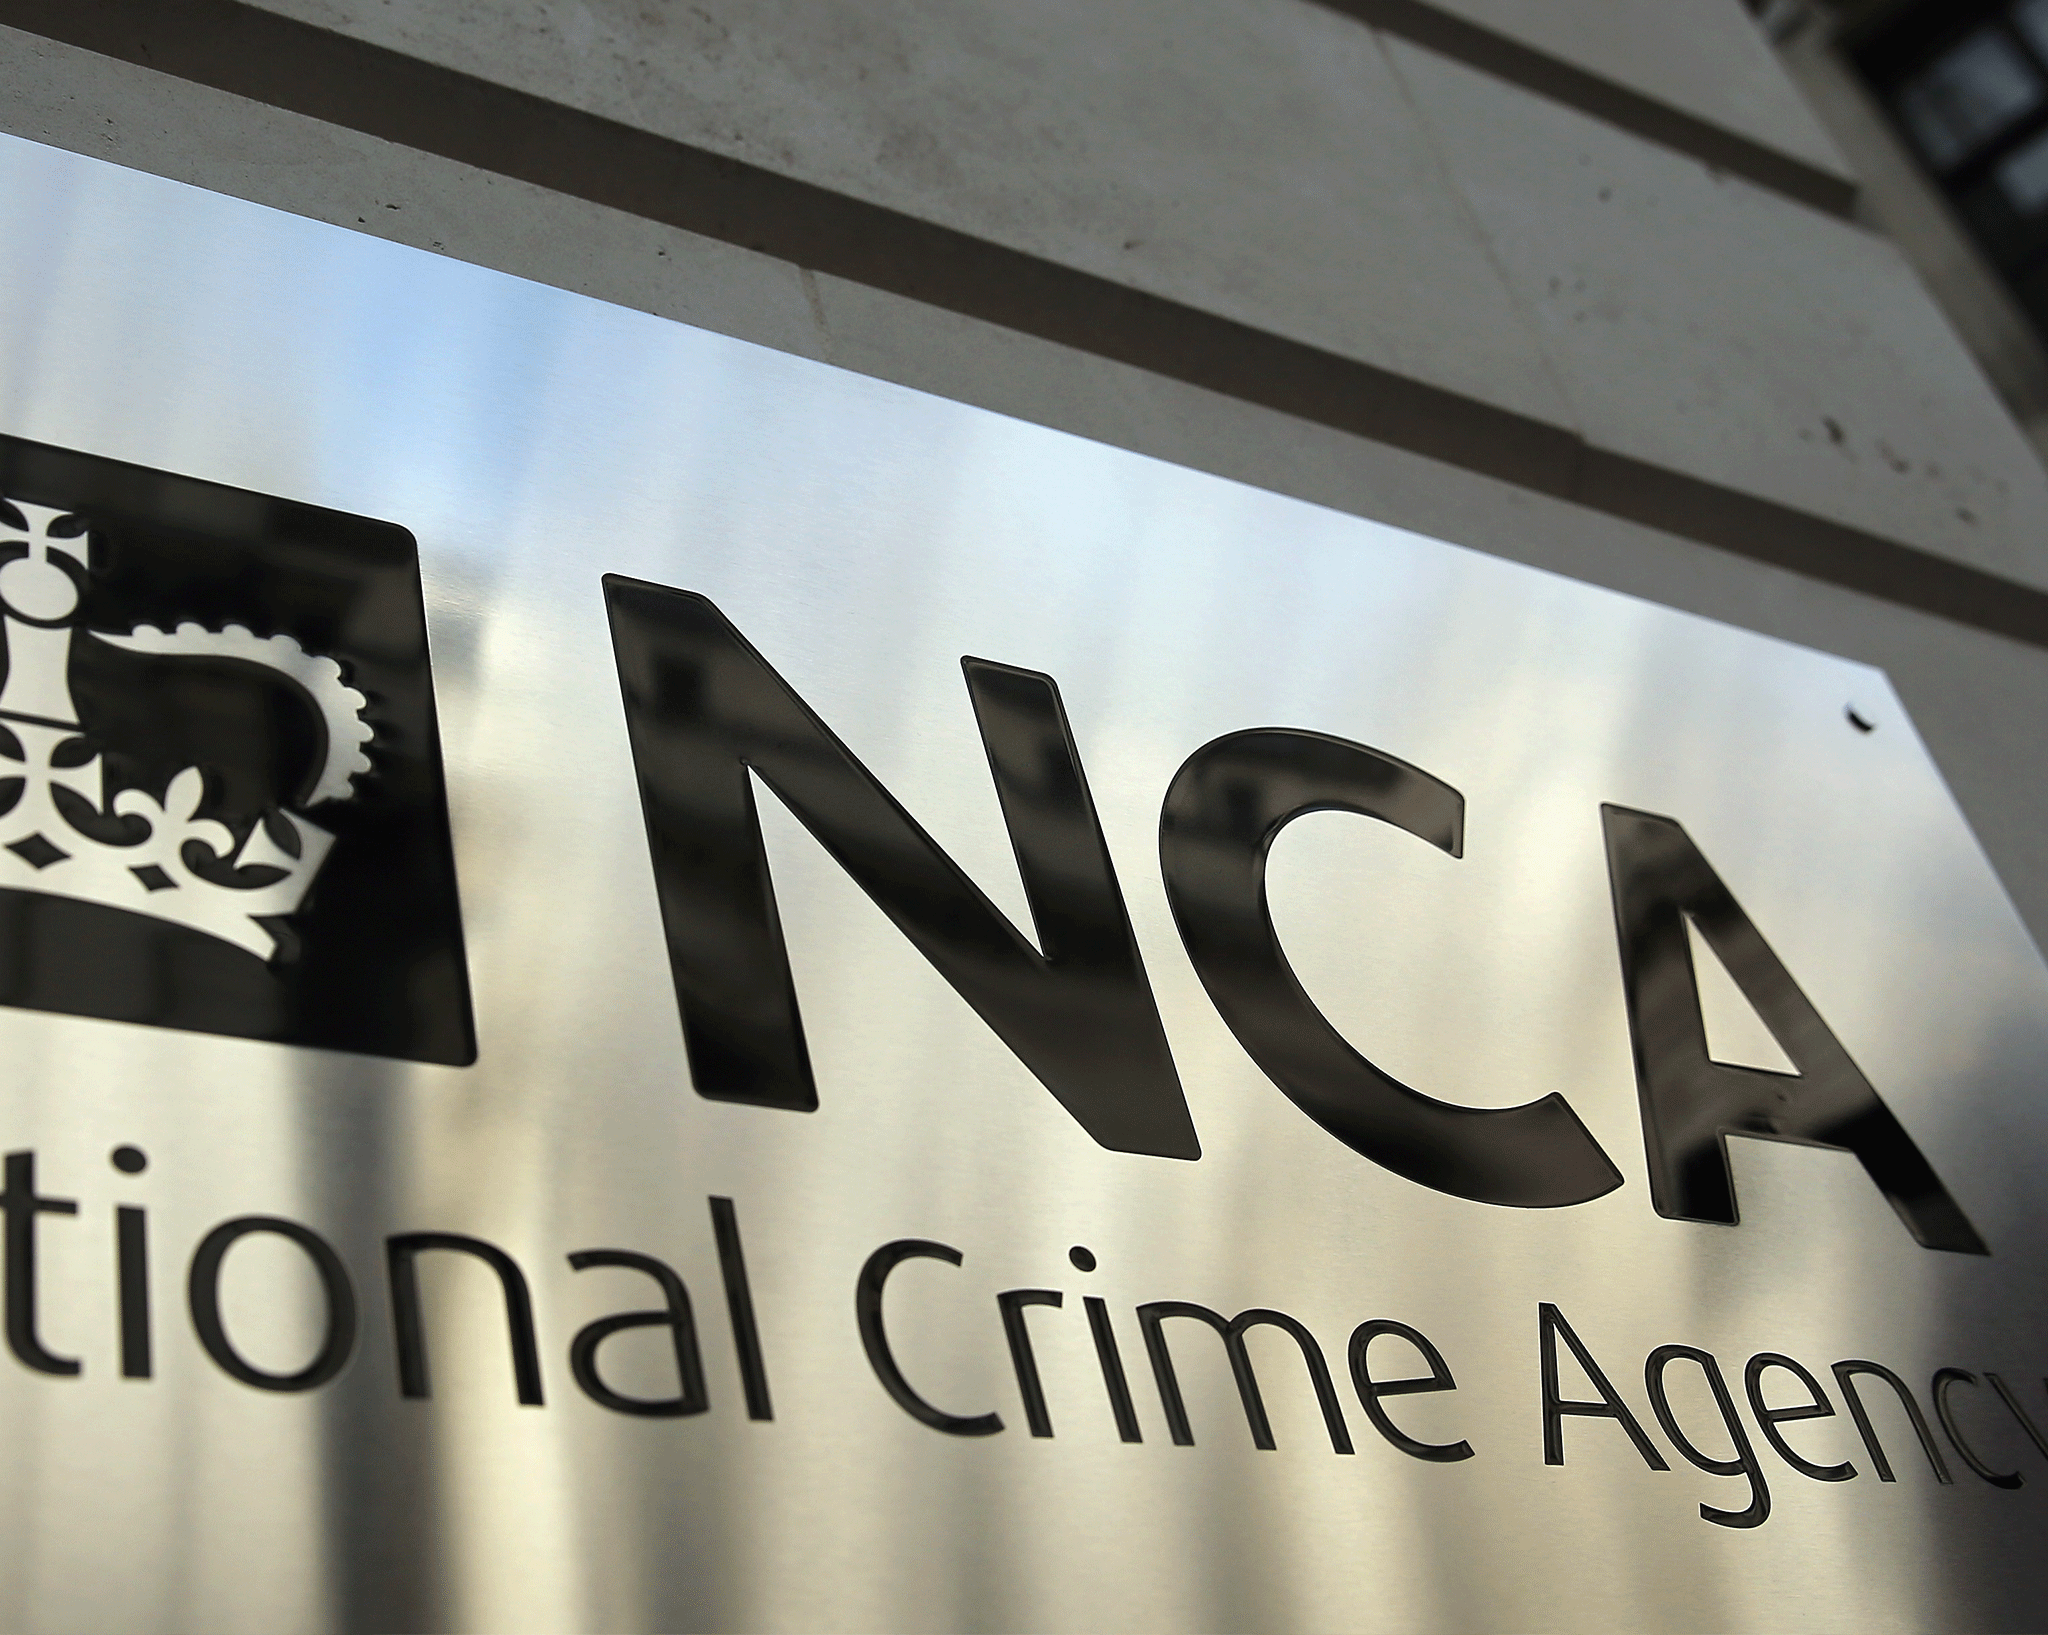 A general view of The National Crime Agency building in Westminster on October 7, 2013 in London, England.